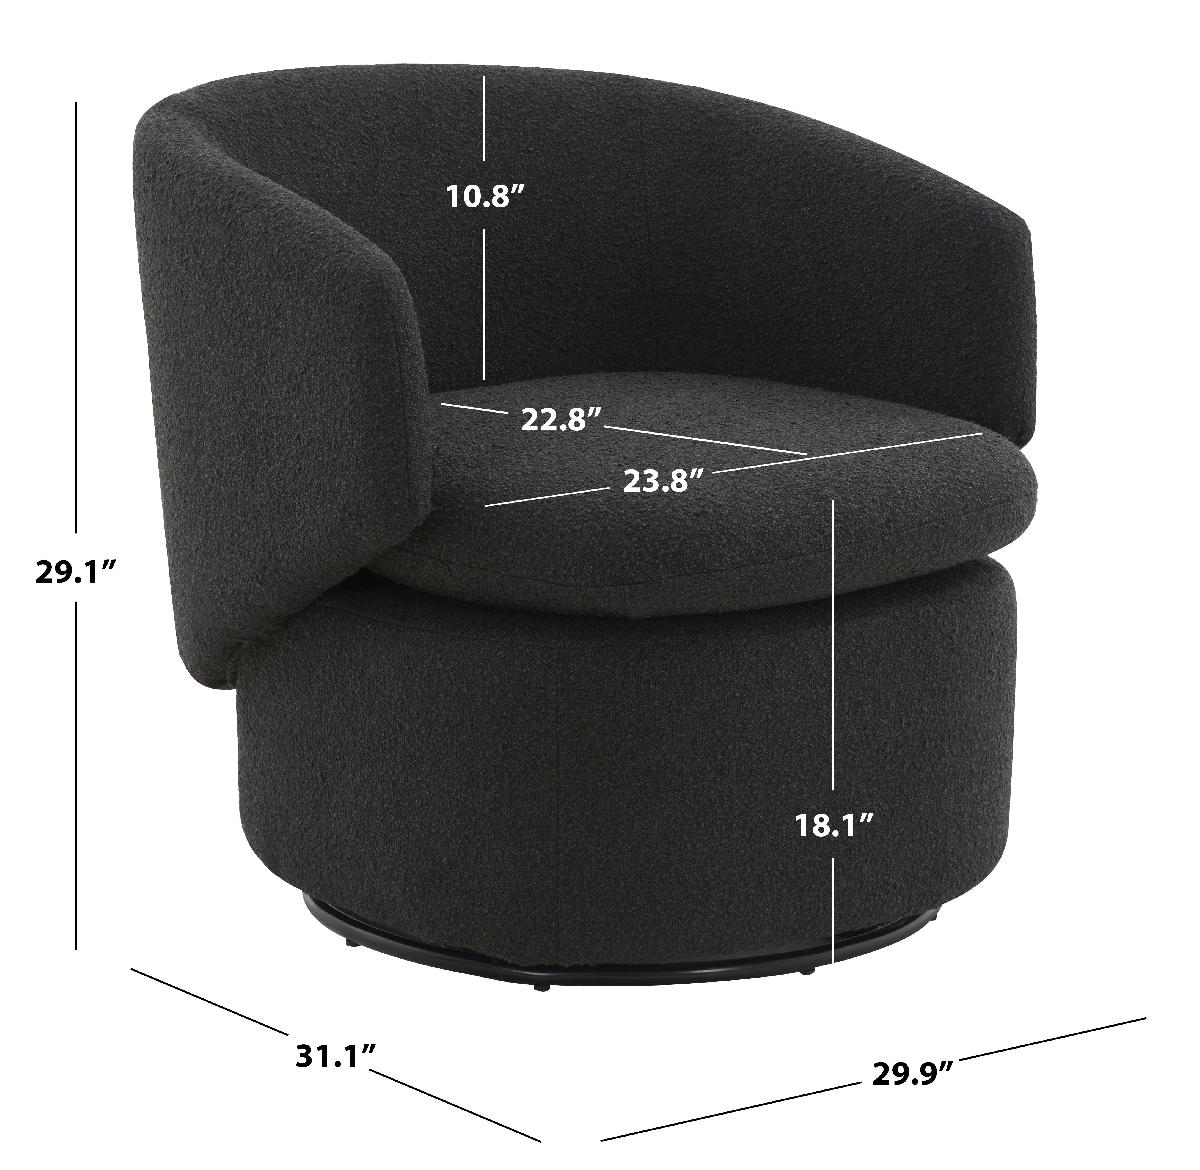 Safavieh Couture Phyllis Boucle Swivel Chair - Black